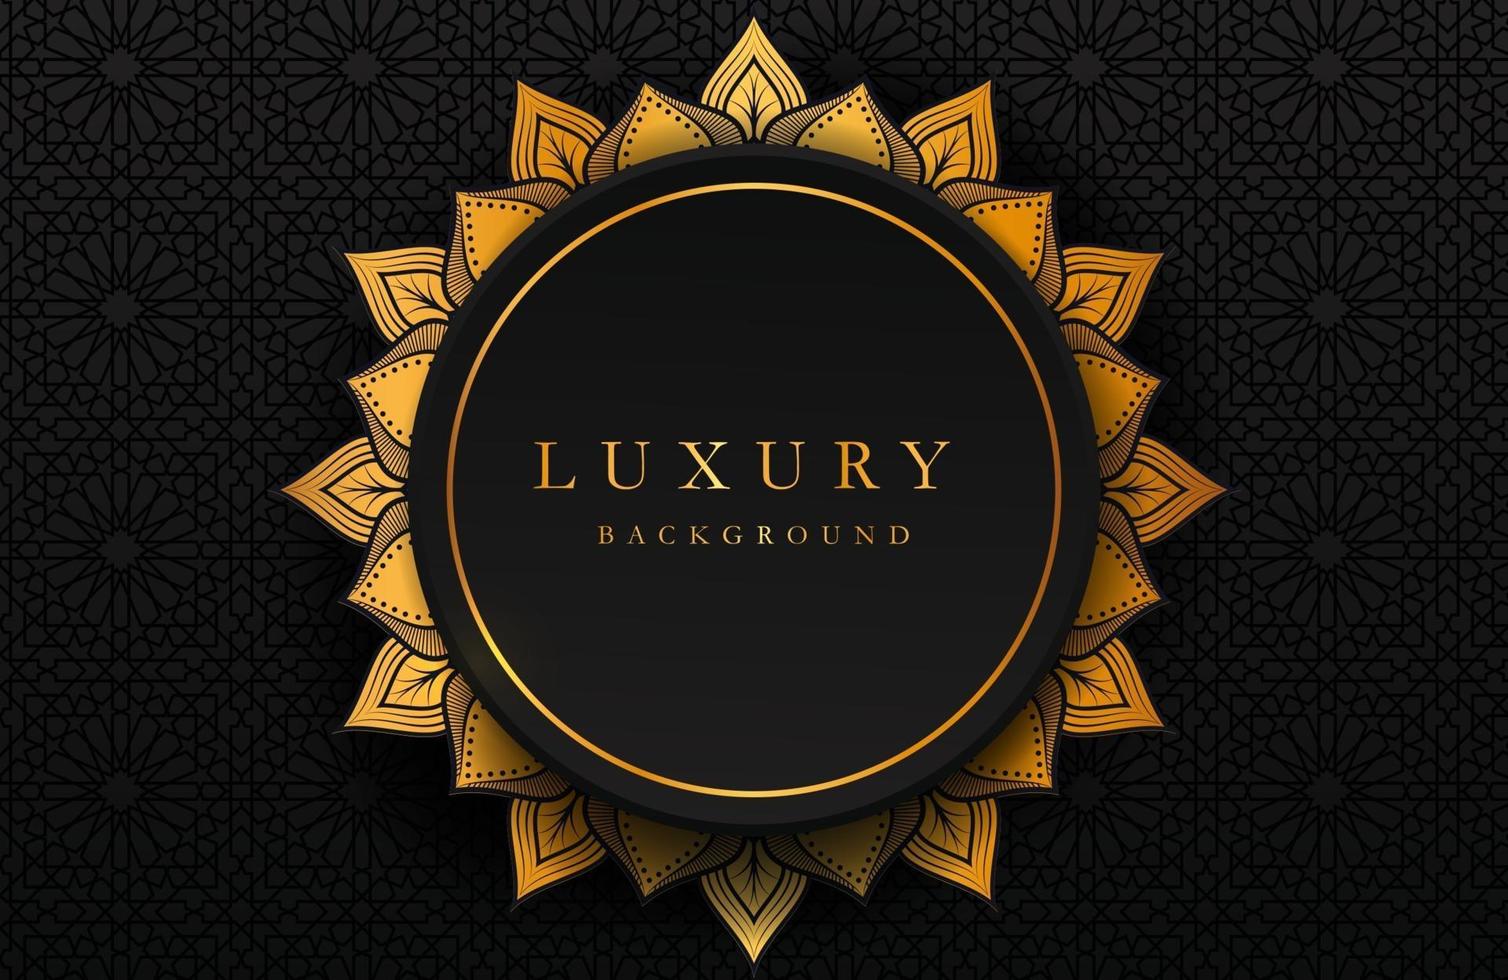 Luxury background with gold islamic mandala ornament on dark surface vector